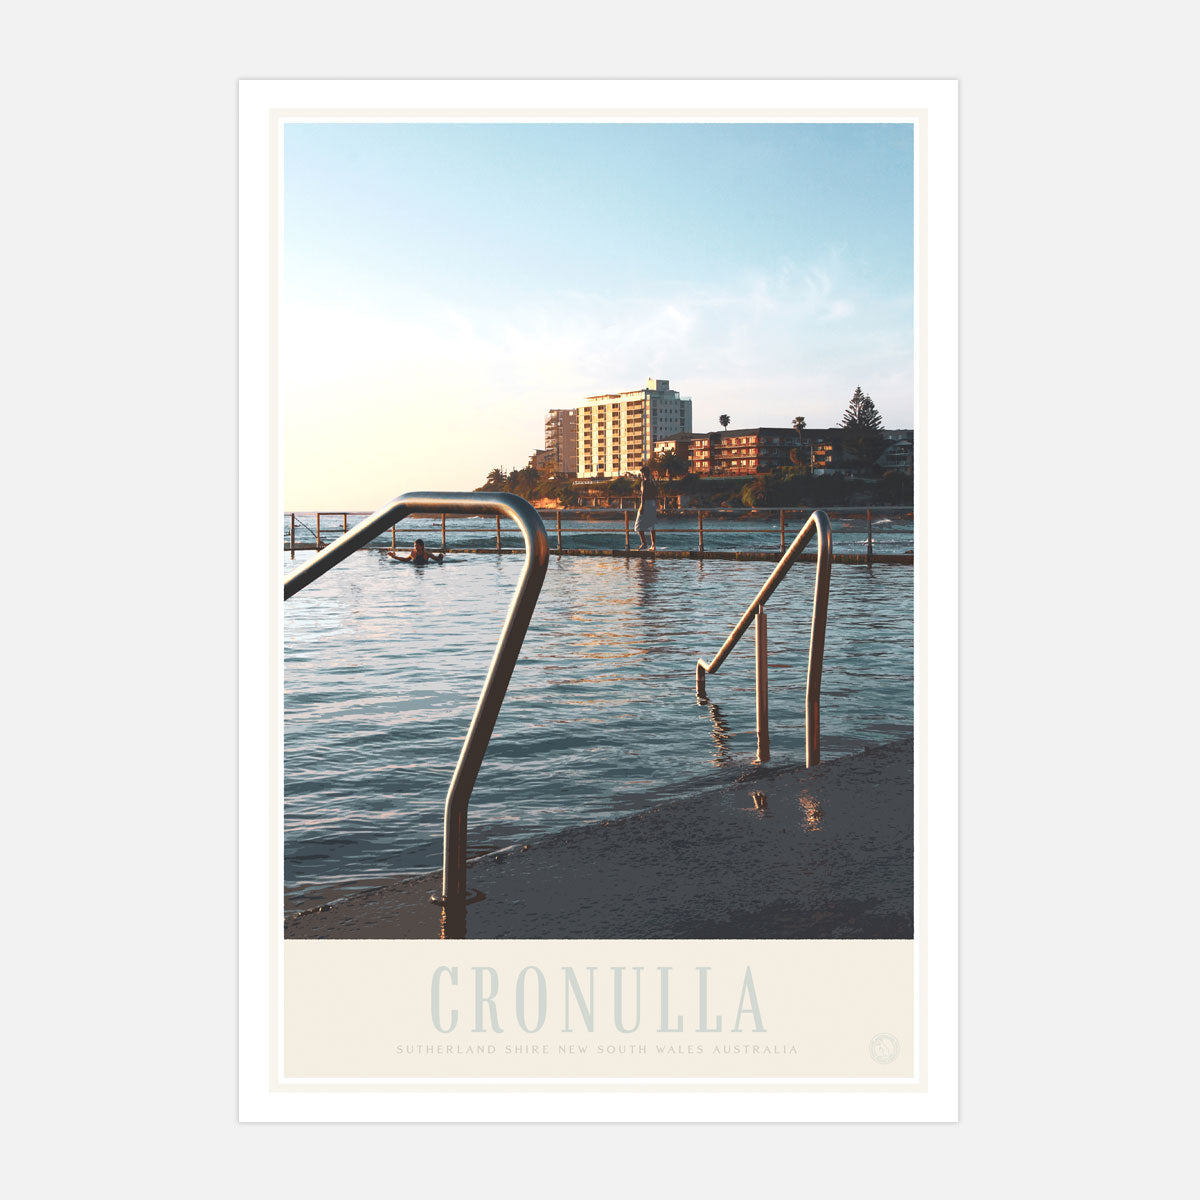 Cronulla Beach Pool vintage retro travel poster by Places We Luv